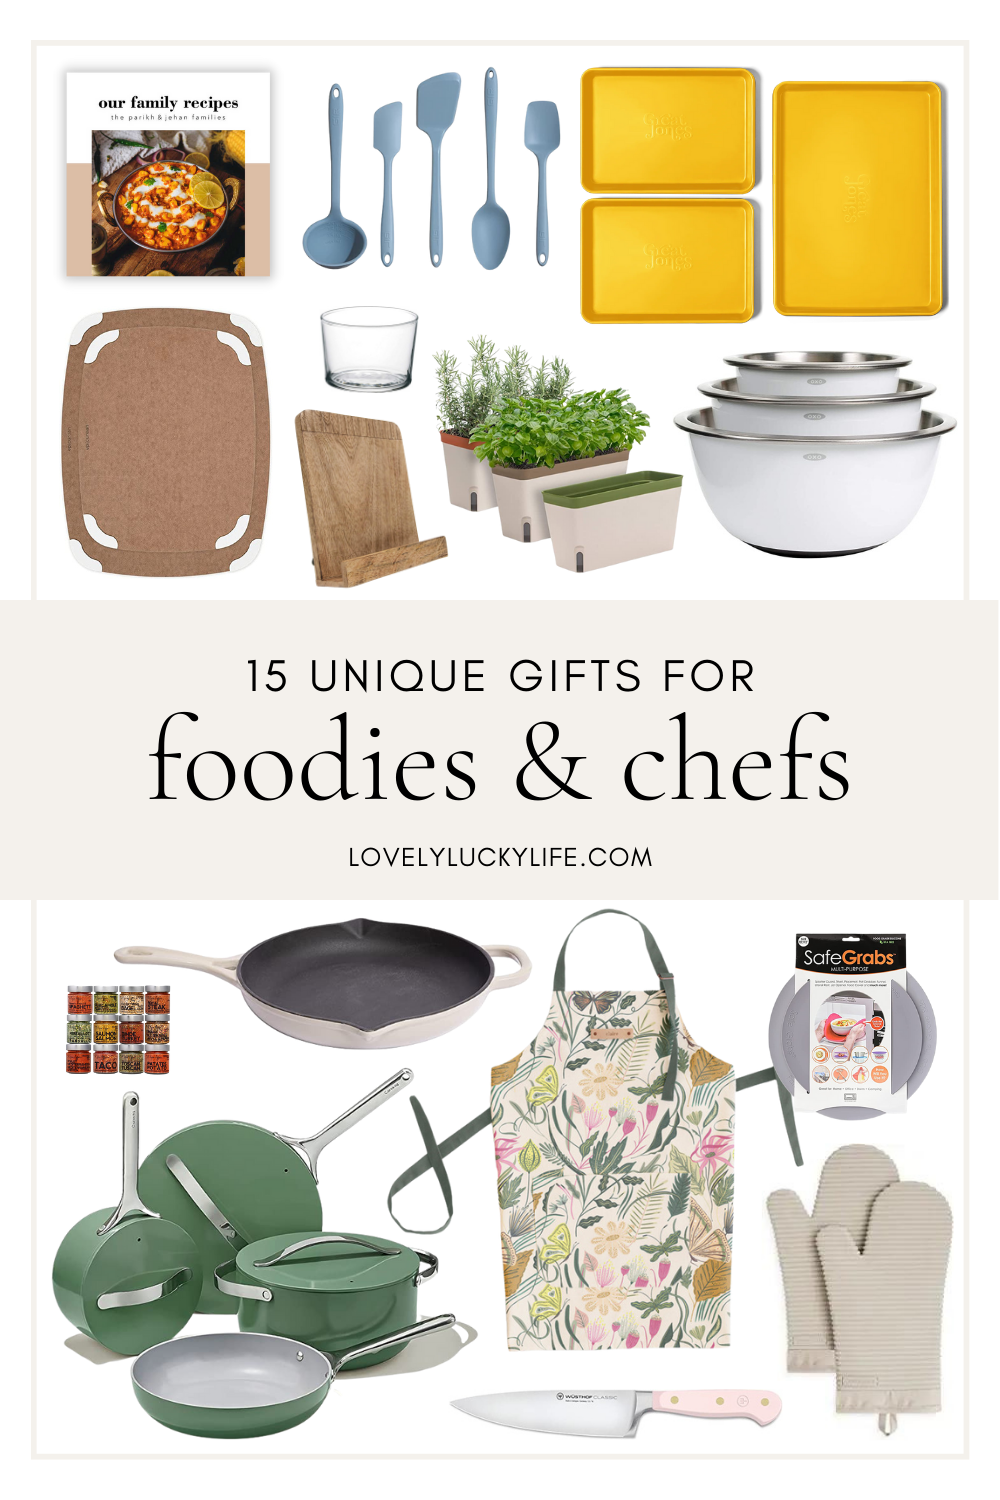 https://www.lovelyluckylife.com/wp-content/uploads/2023/04/15-Unique-Gifts-for-Foodies-Chefs.png